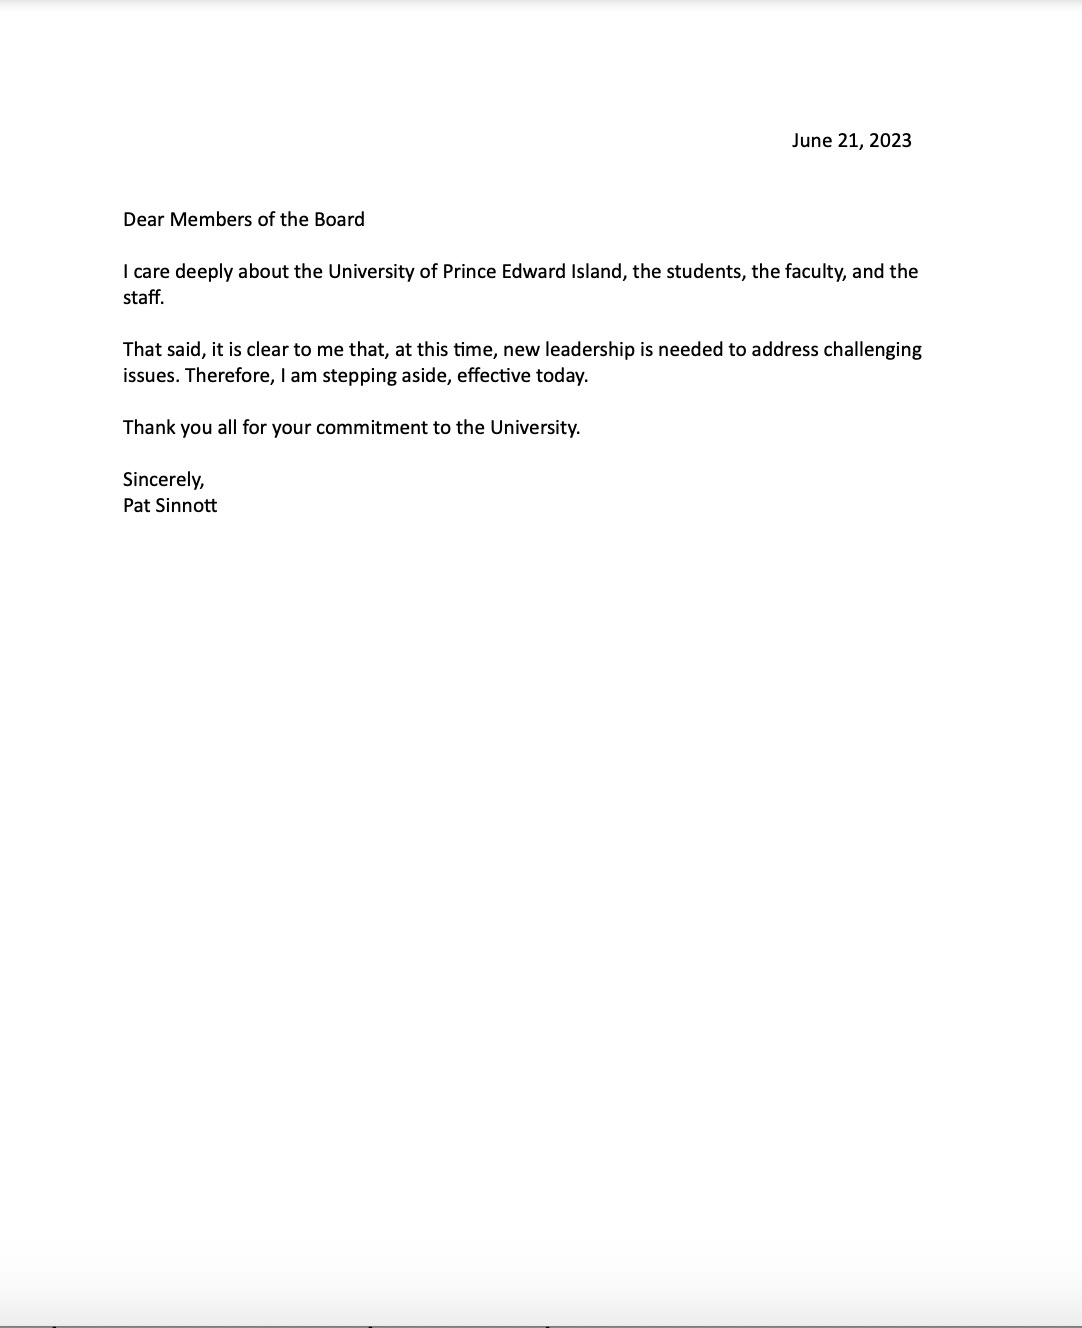 Image of letter of resignation